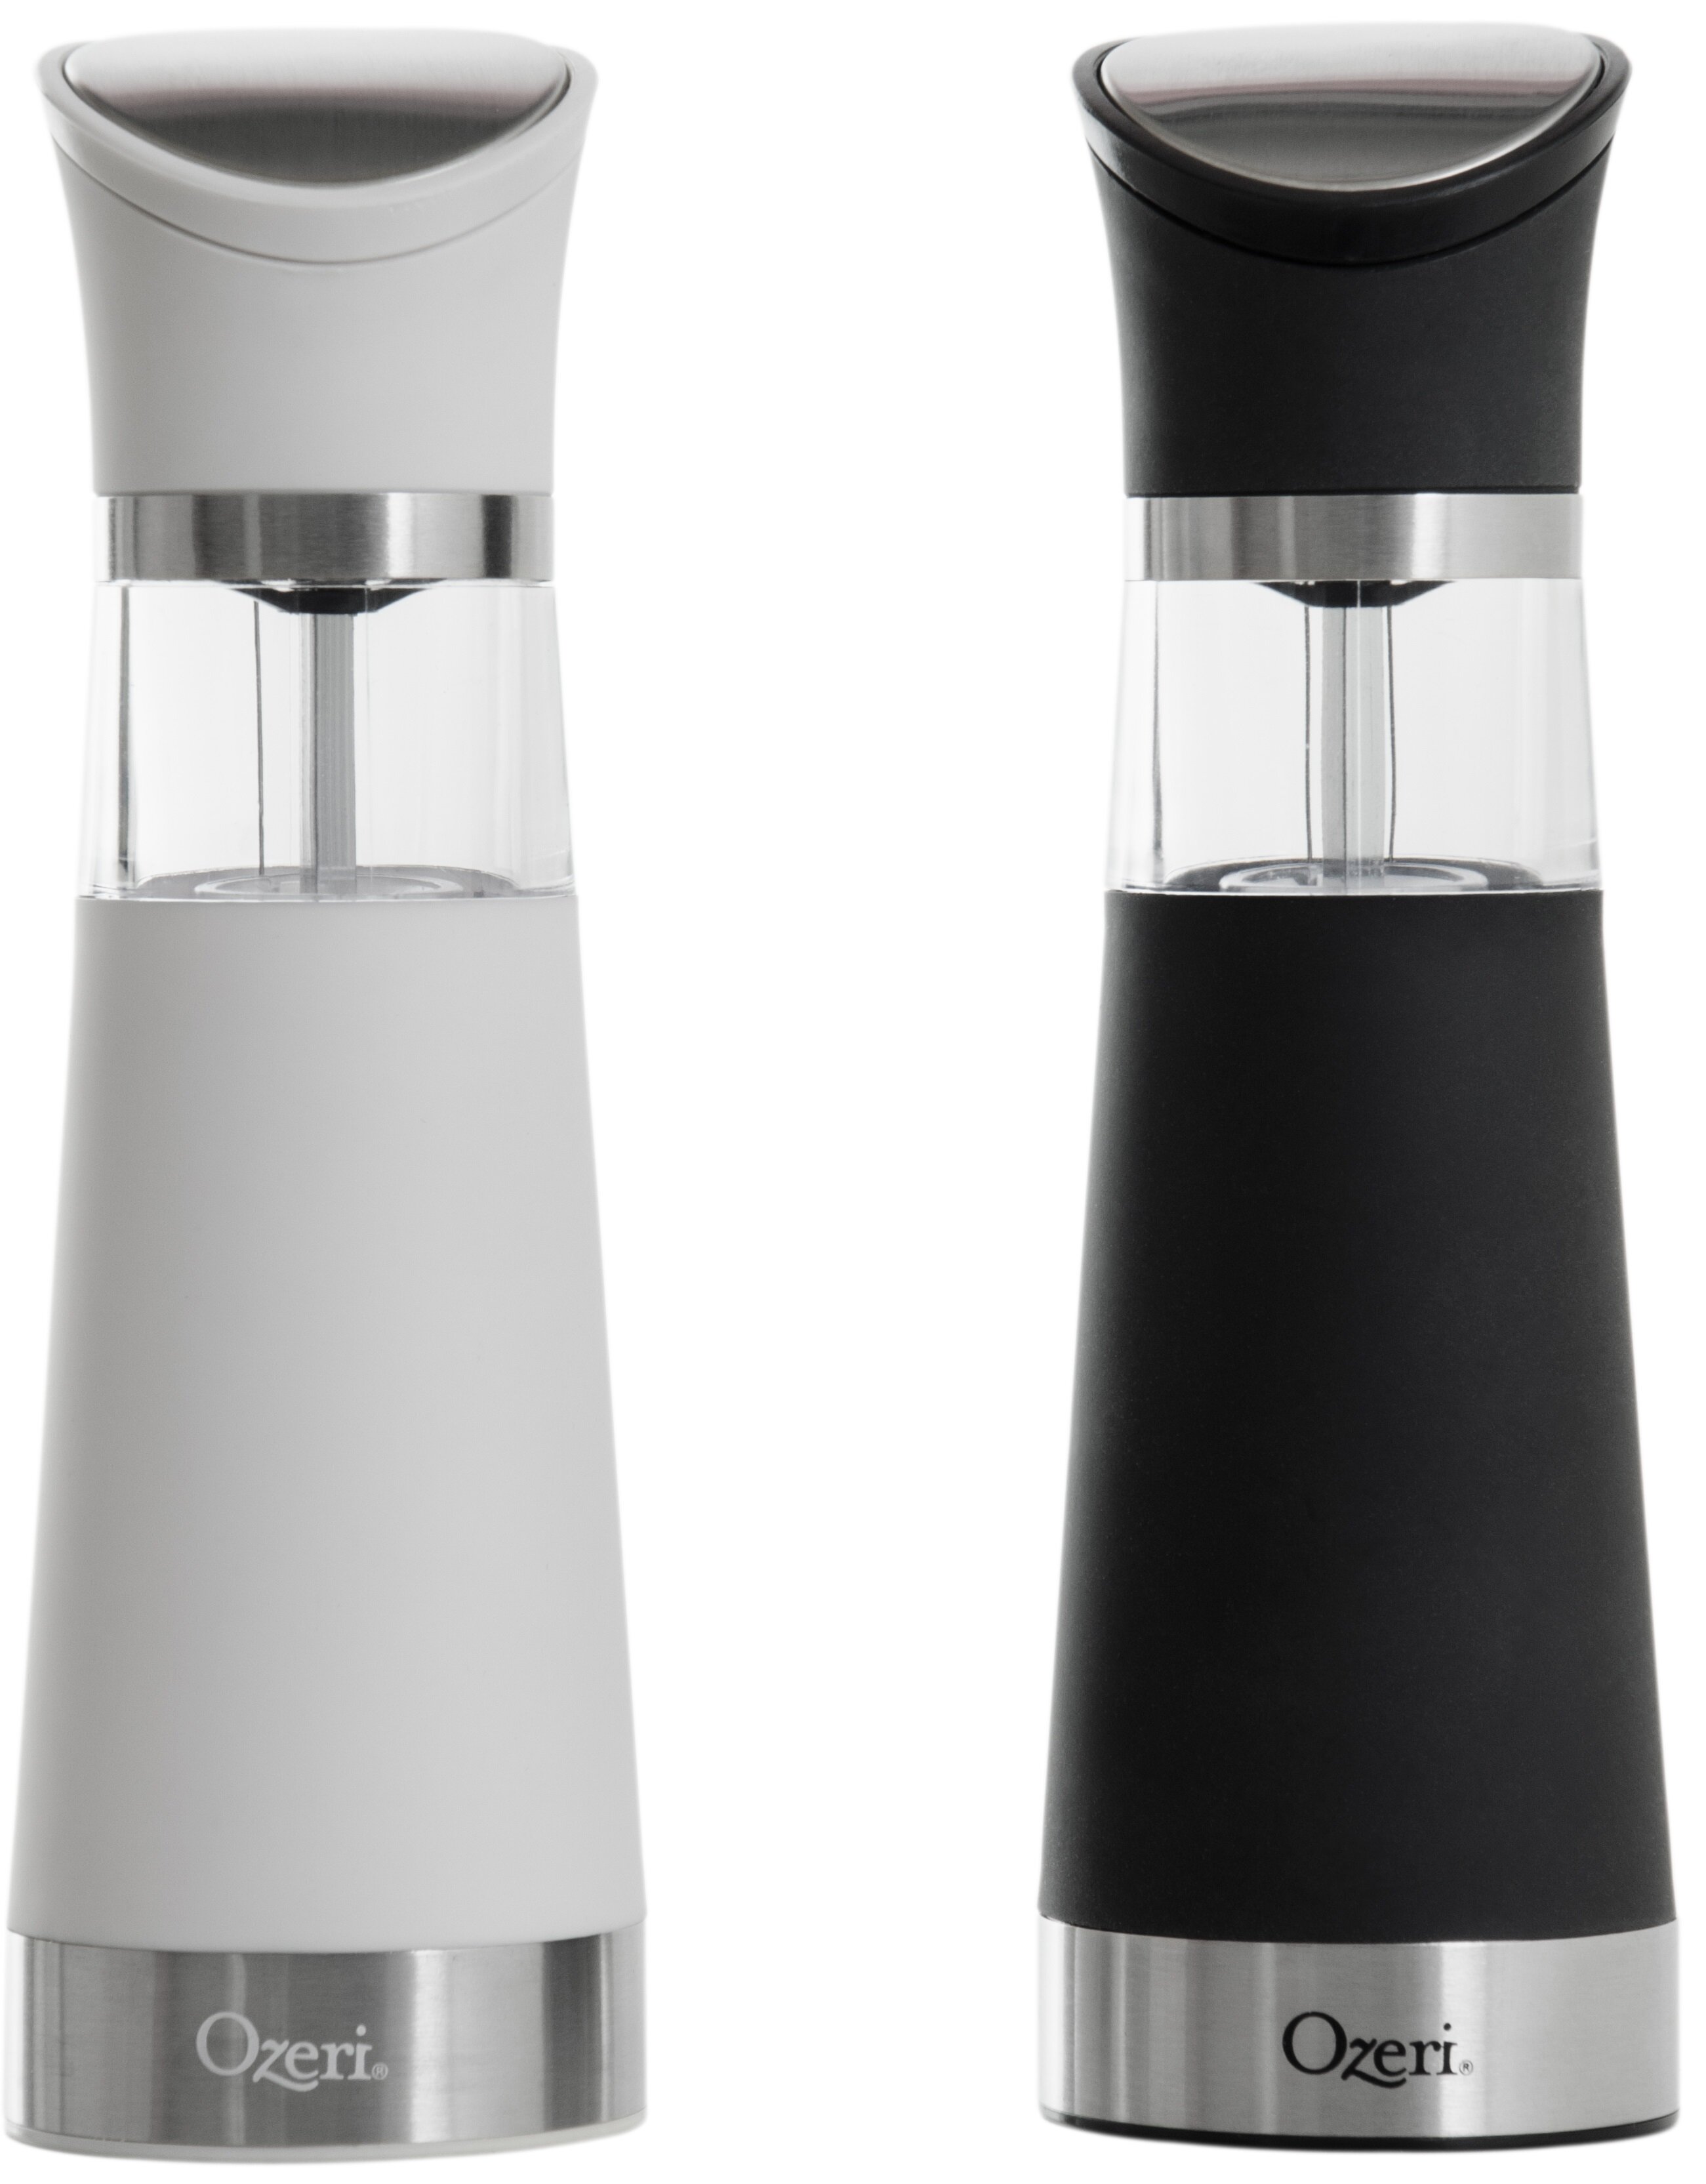 Zwilling - Enfinigy Electric Salt/Pepper Mill - White